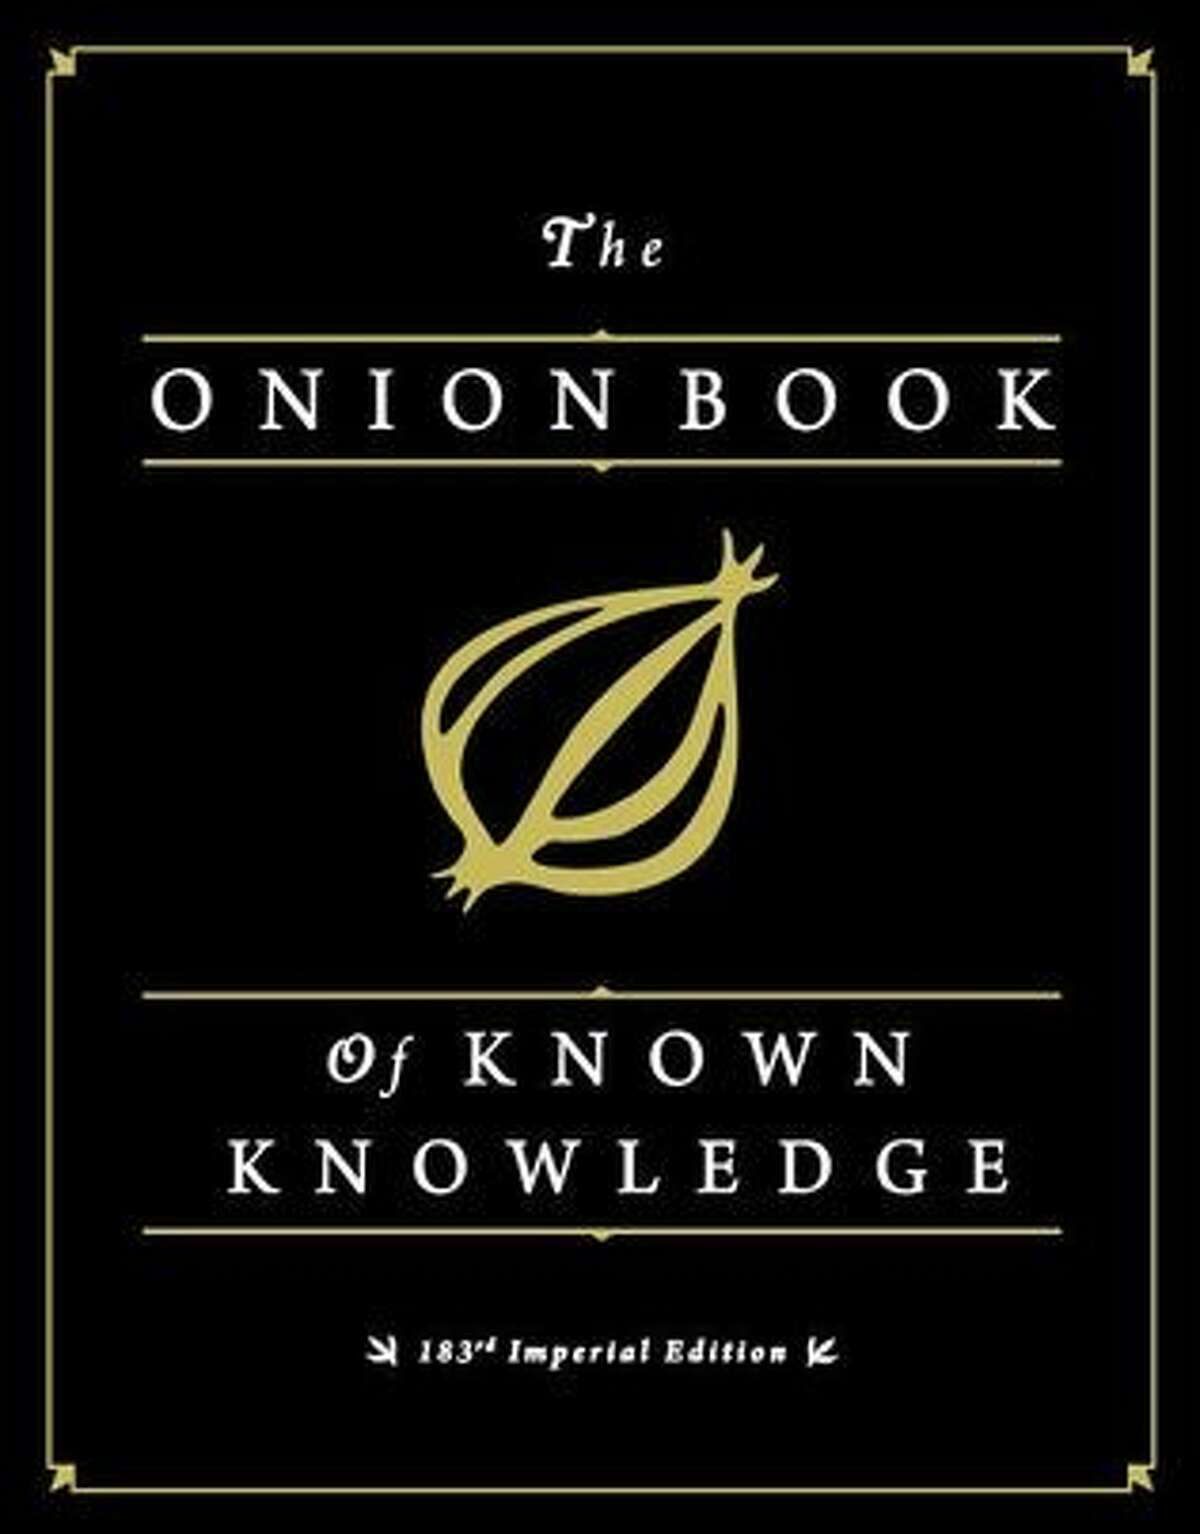 The Onion Book of Known Knowledge: A Definitive Encyclopaedia Of Existing Information, by The Onion